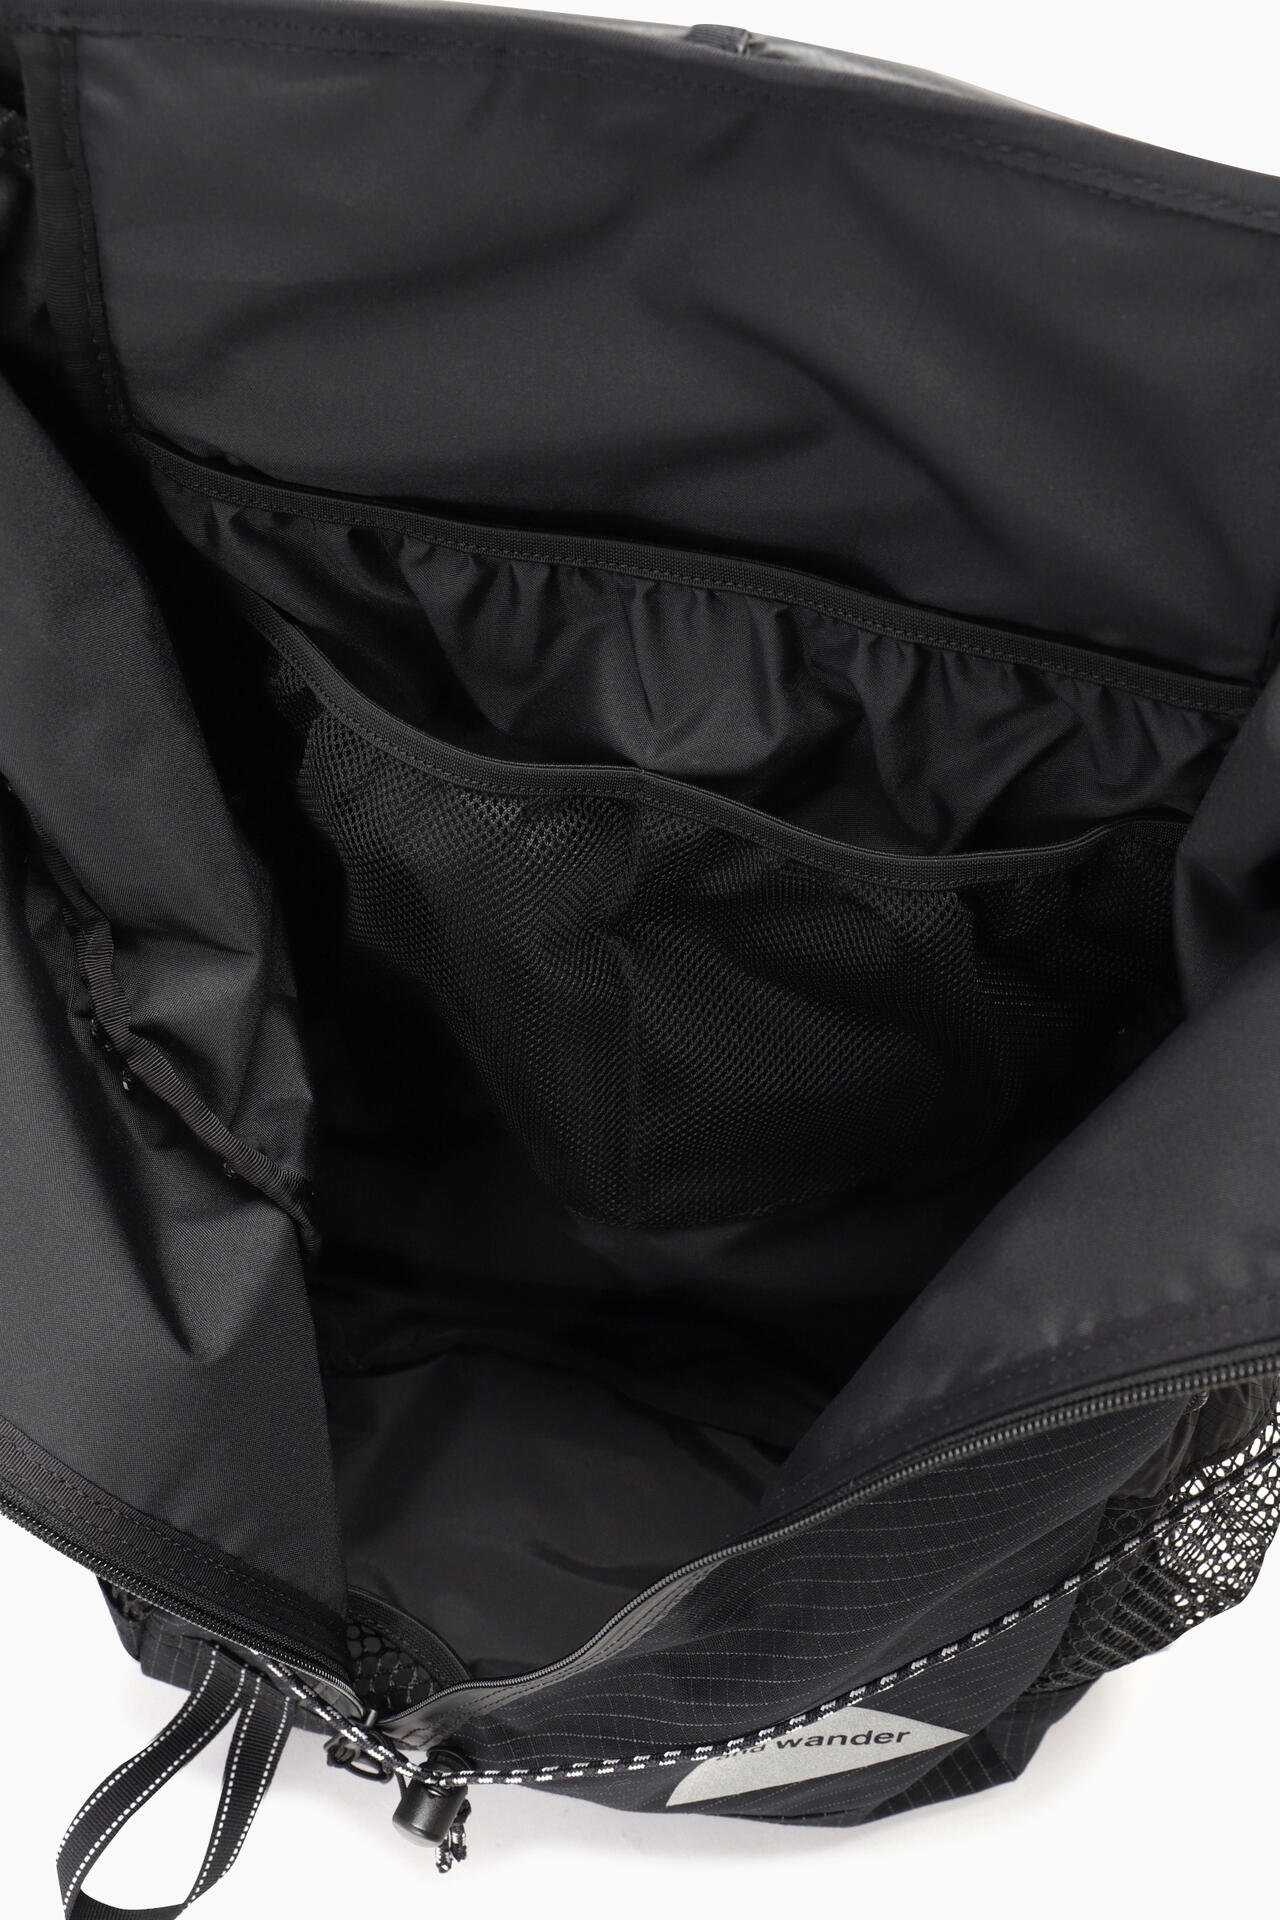 reflective rip 30L backpack